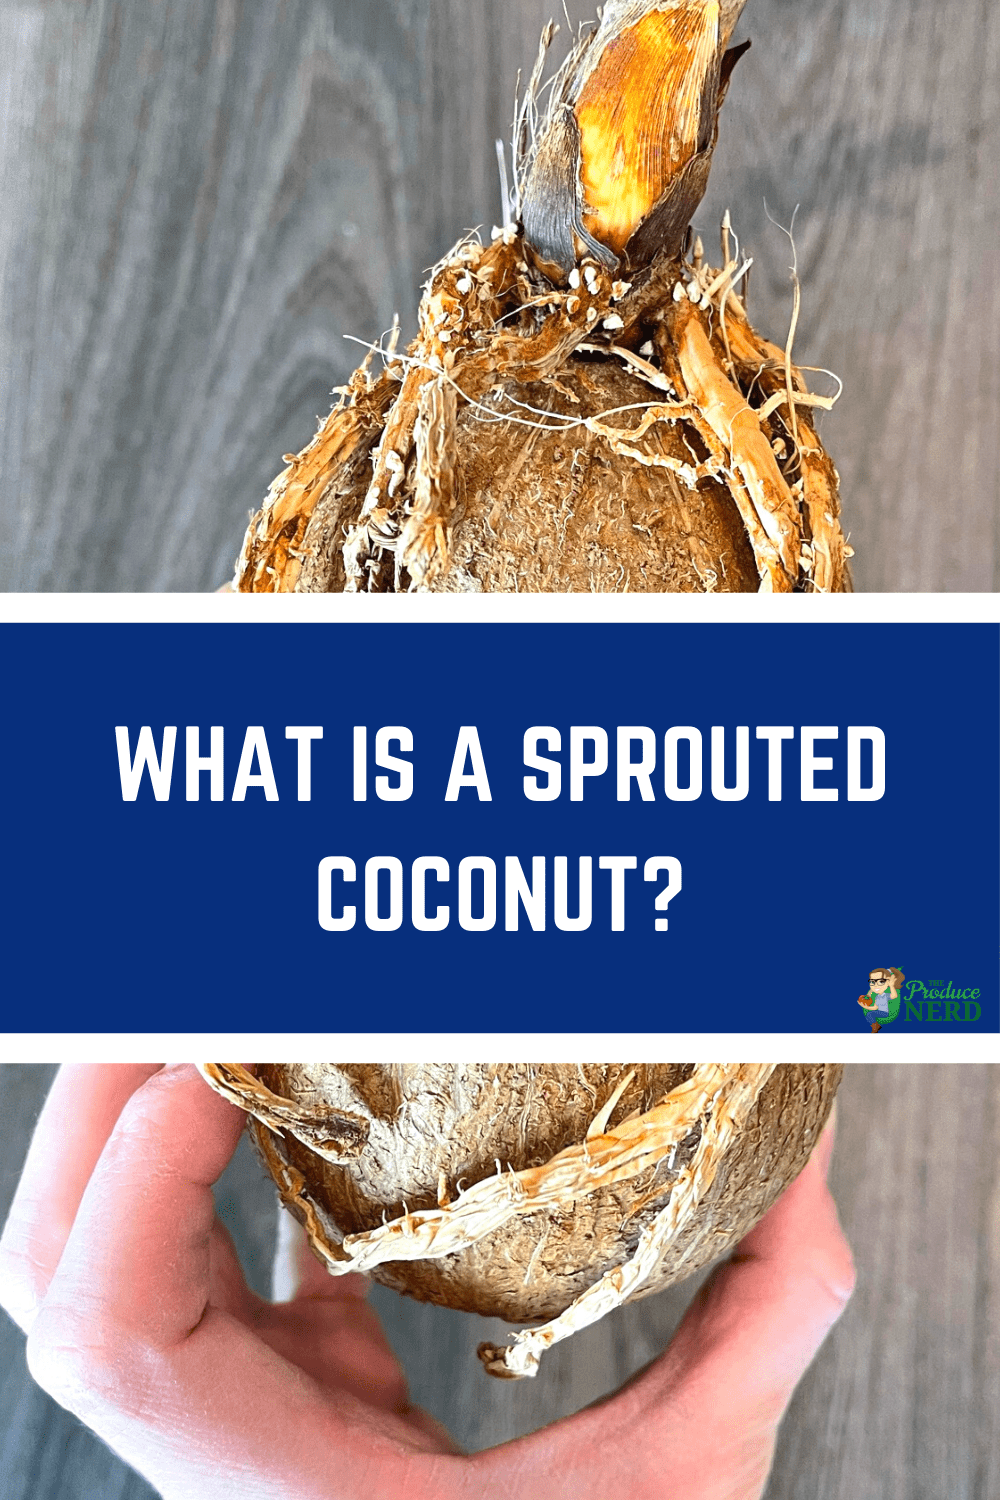 Sprouted Coconut: What is it, How to Open it & What Does it Taste Like? -  The Produce Nerd